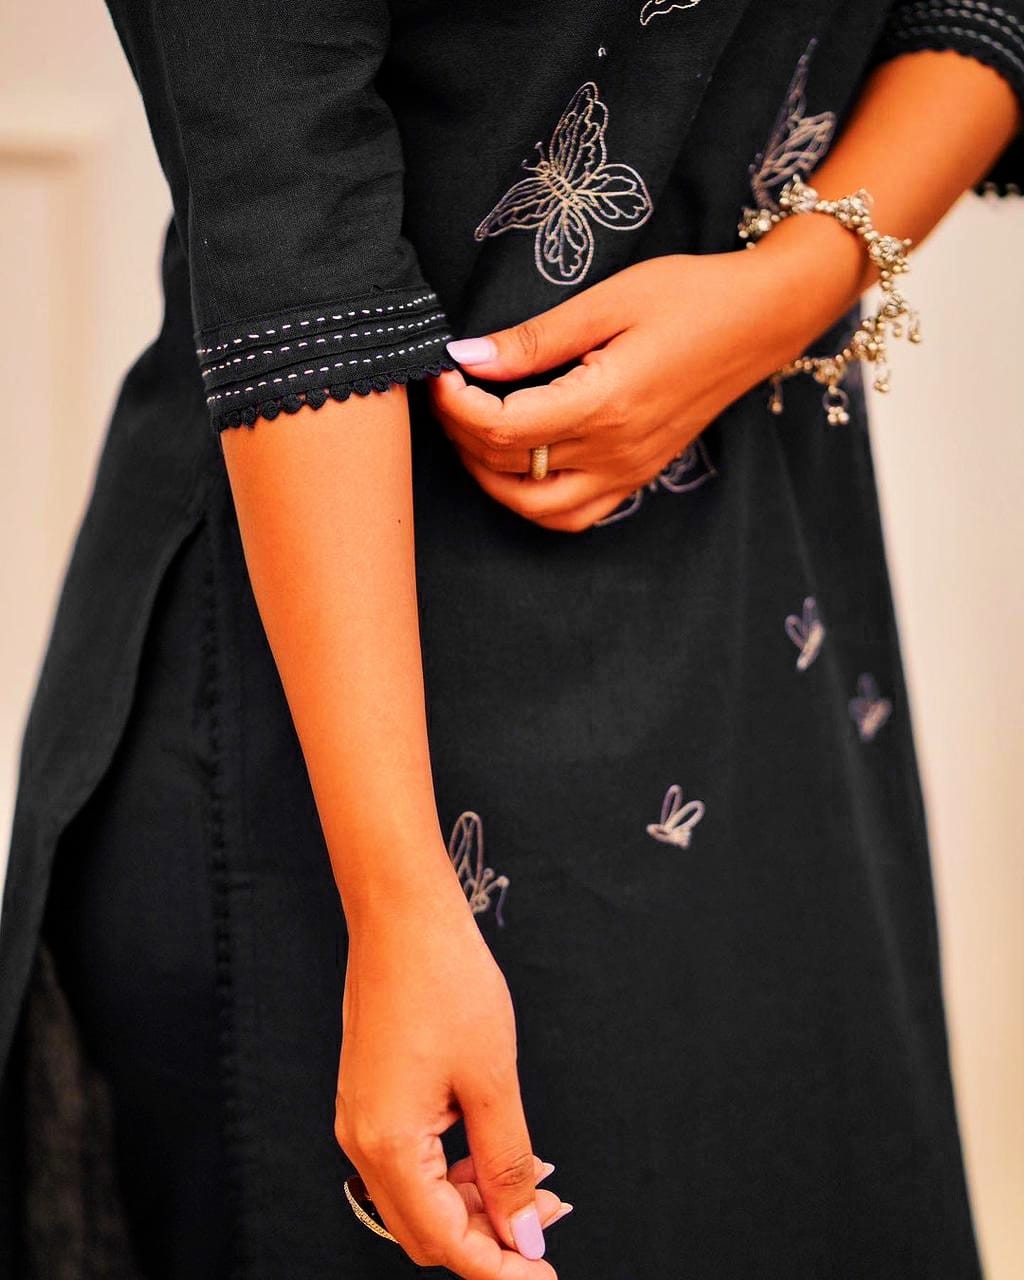 Black Butterfly Embroidery Kurti Set with Lace Details